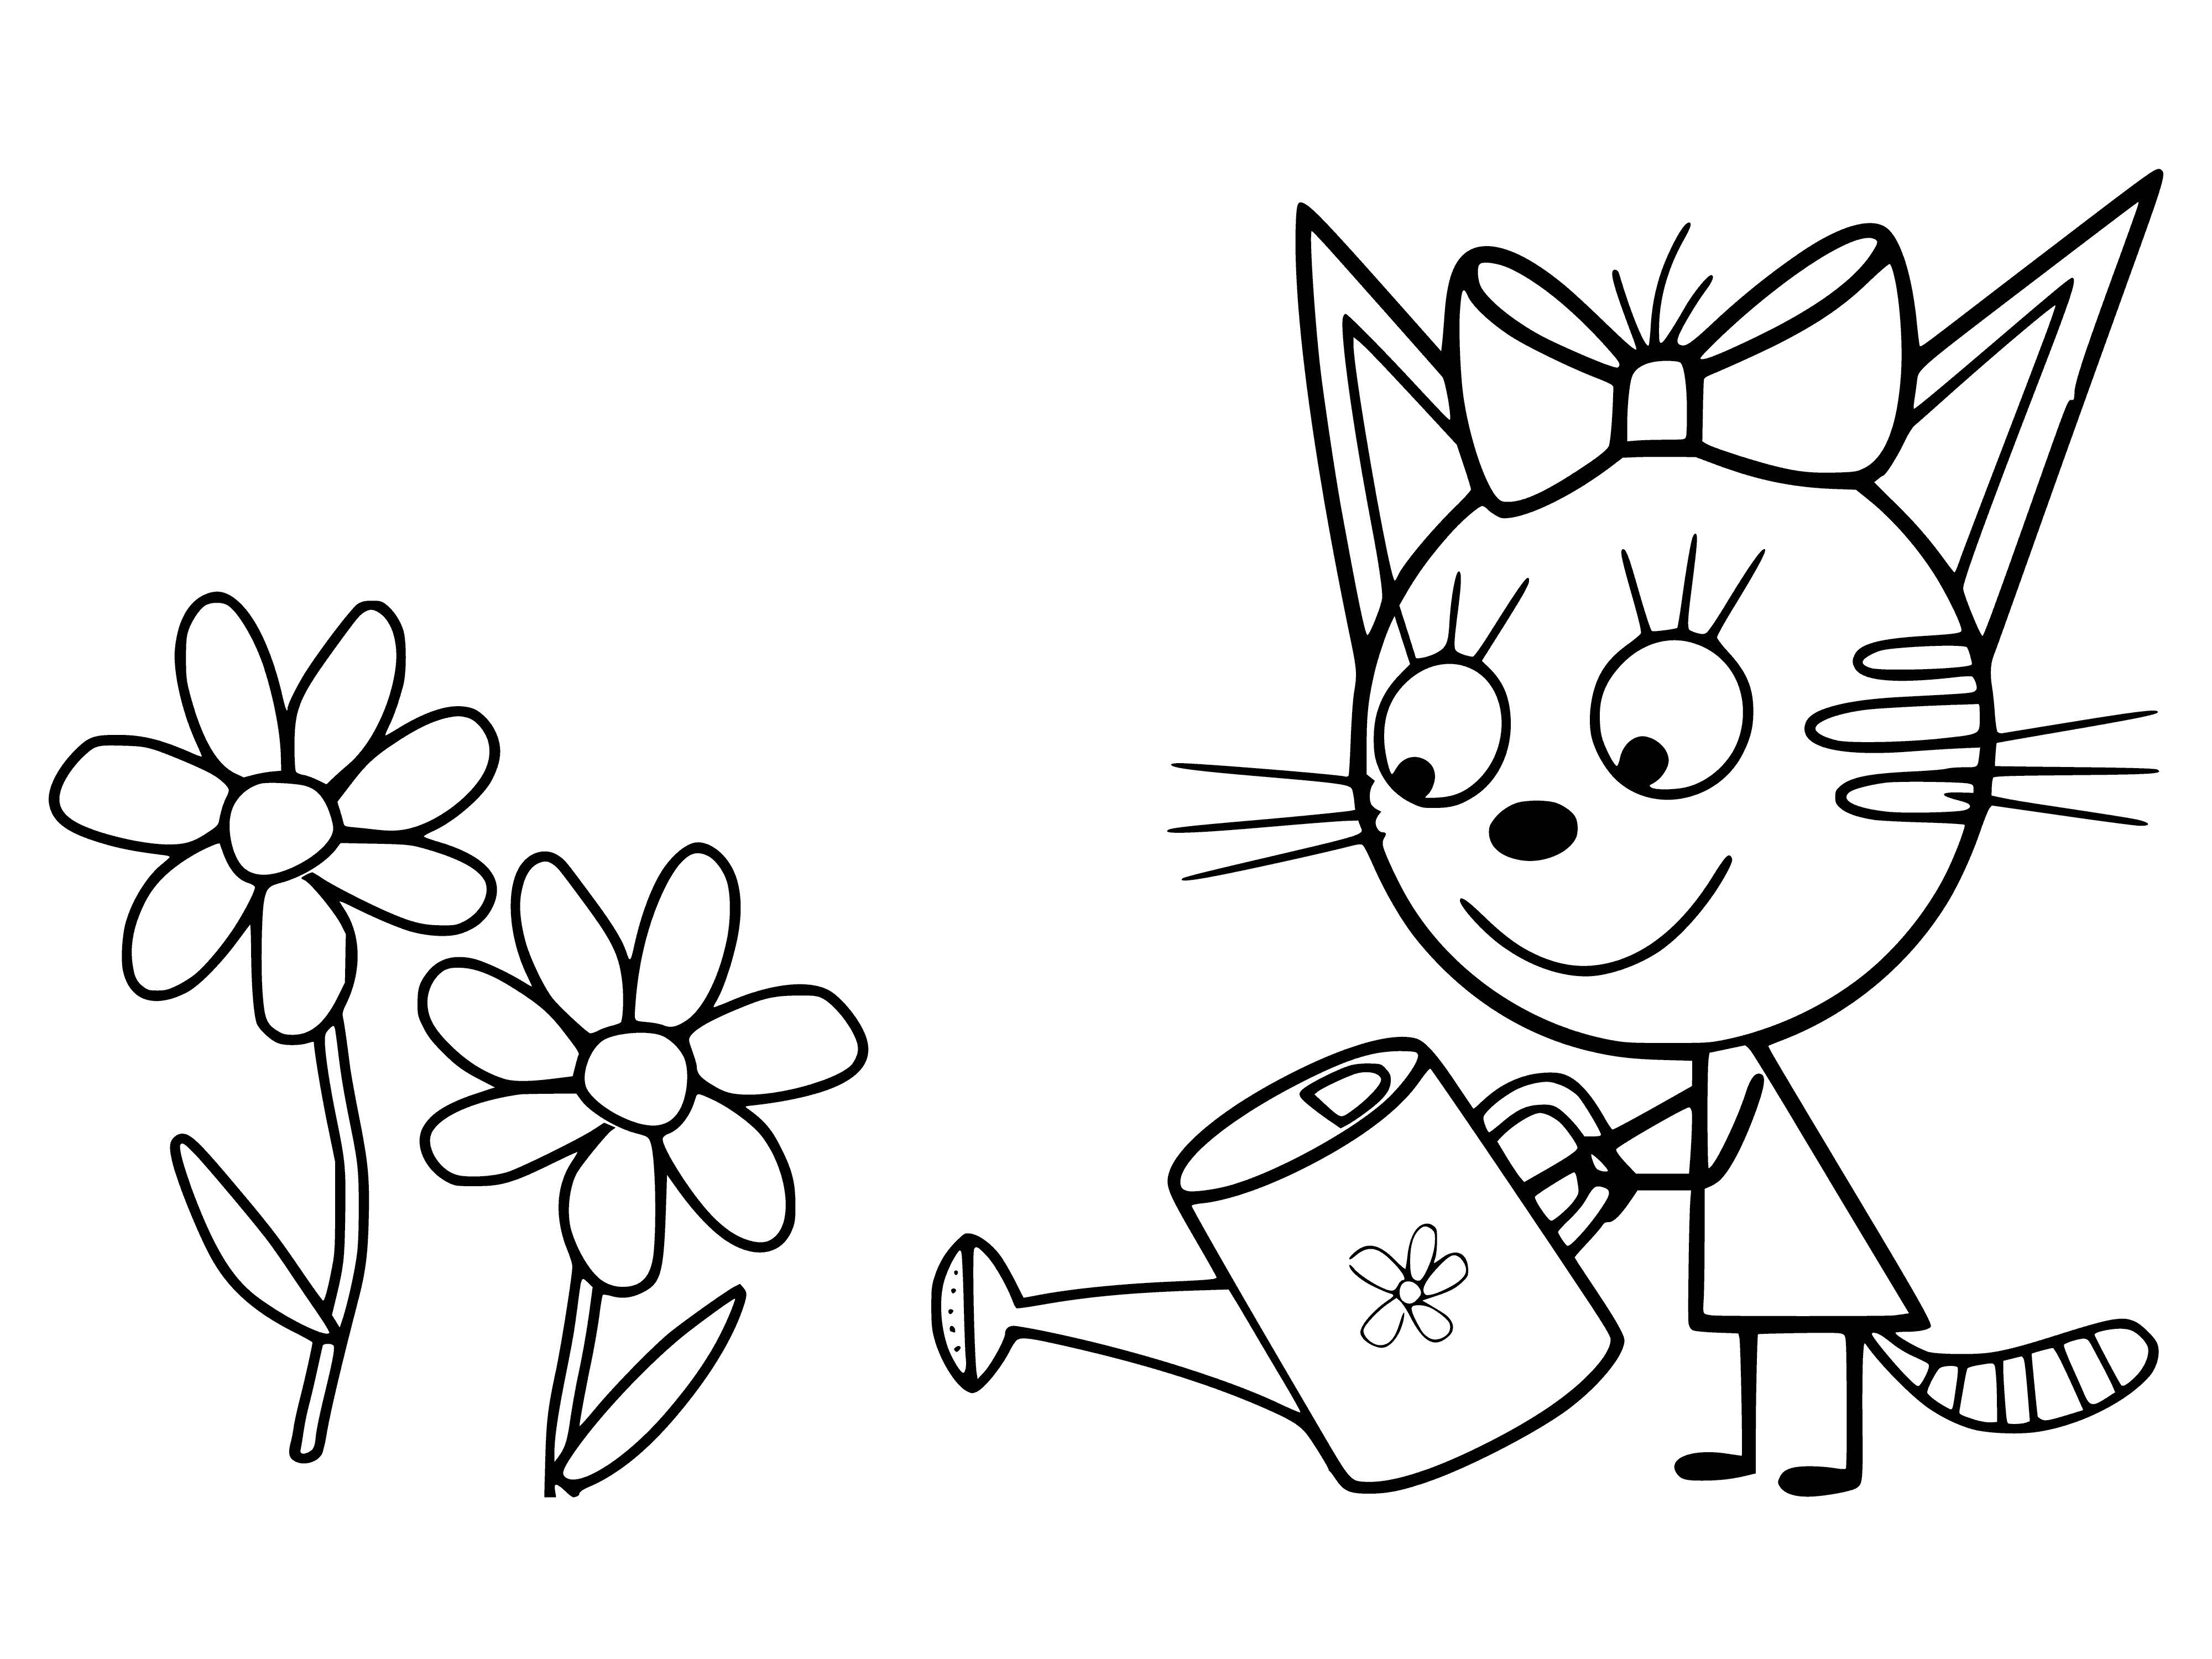 coloring page: 3 cats: 1 brown drinking, 2 black sitting. They're surrounded by flowers.